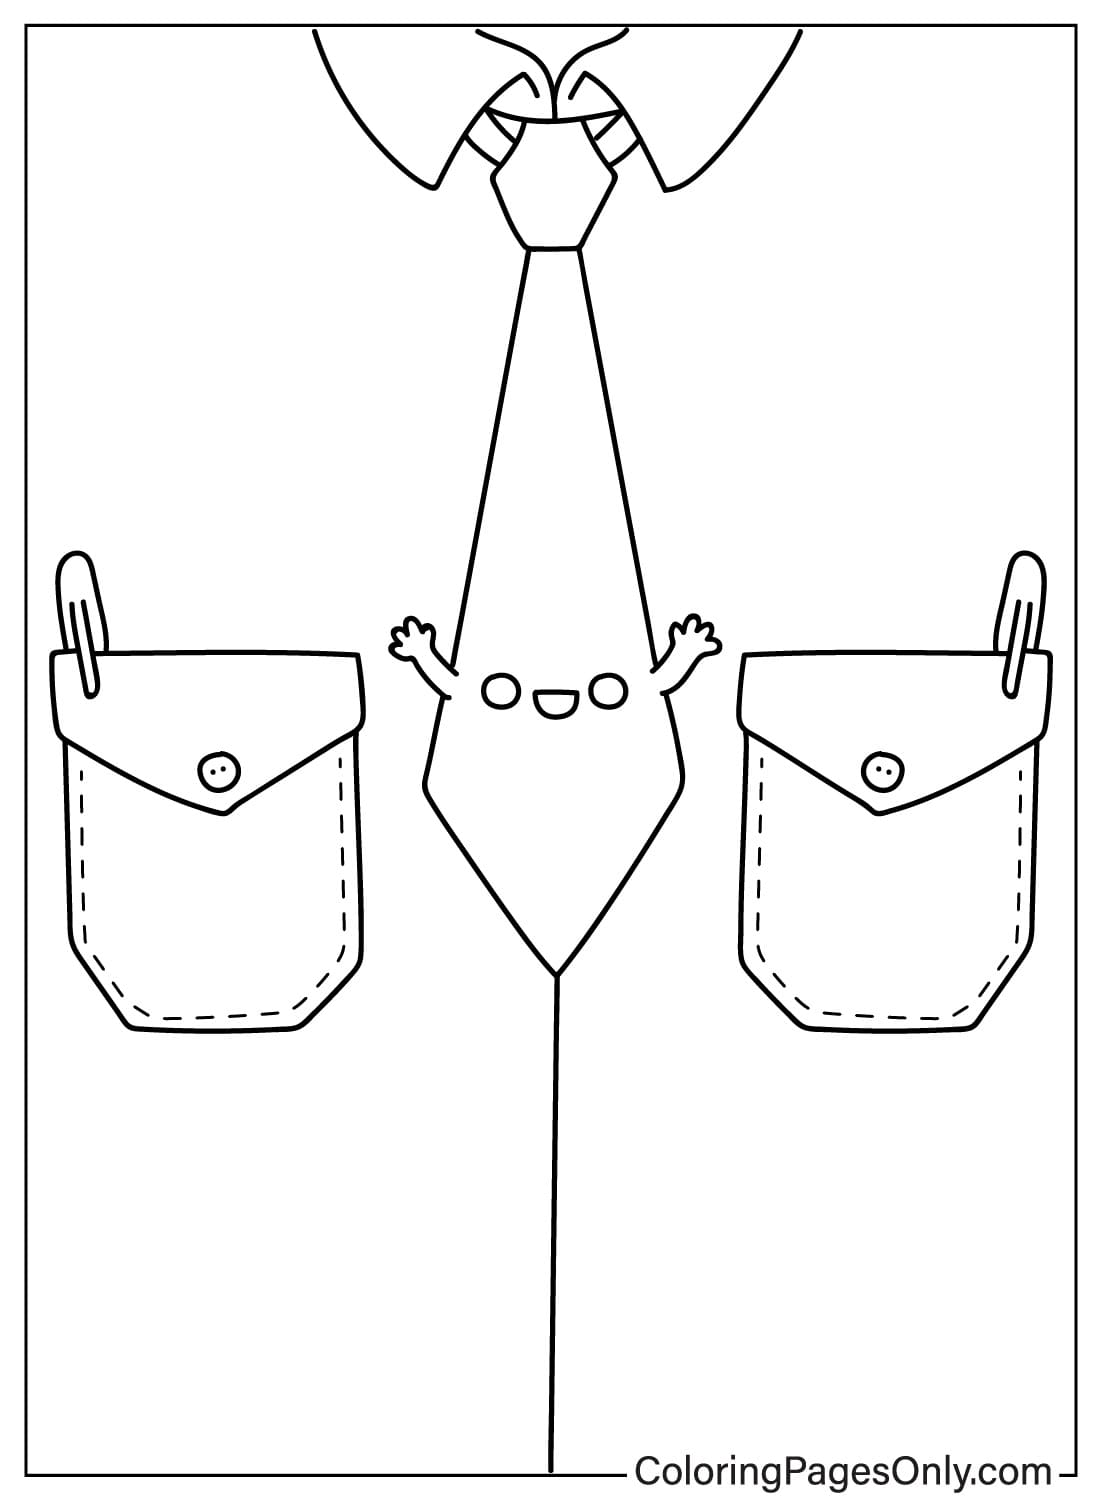 Tie Cute Coloring Page from Tie